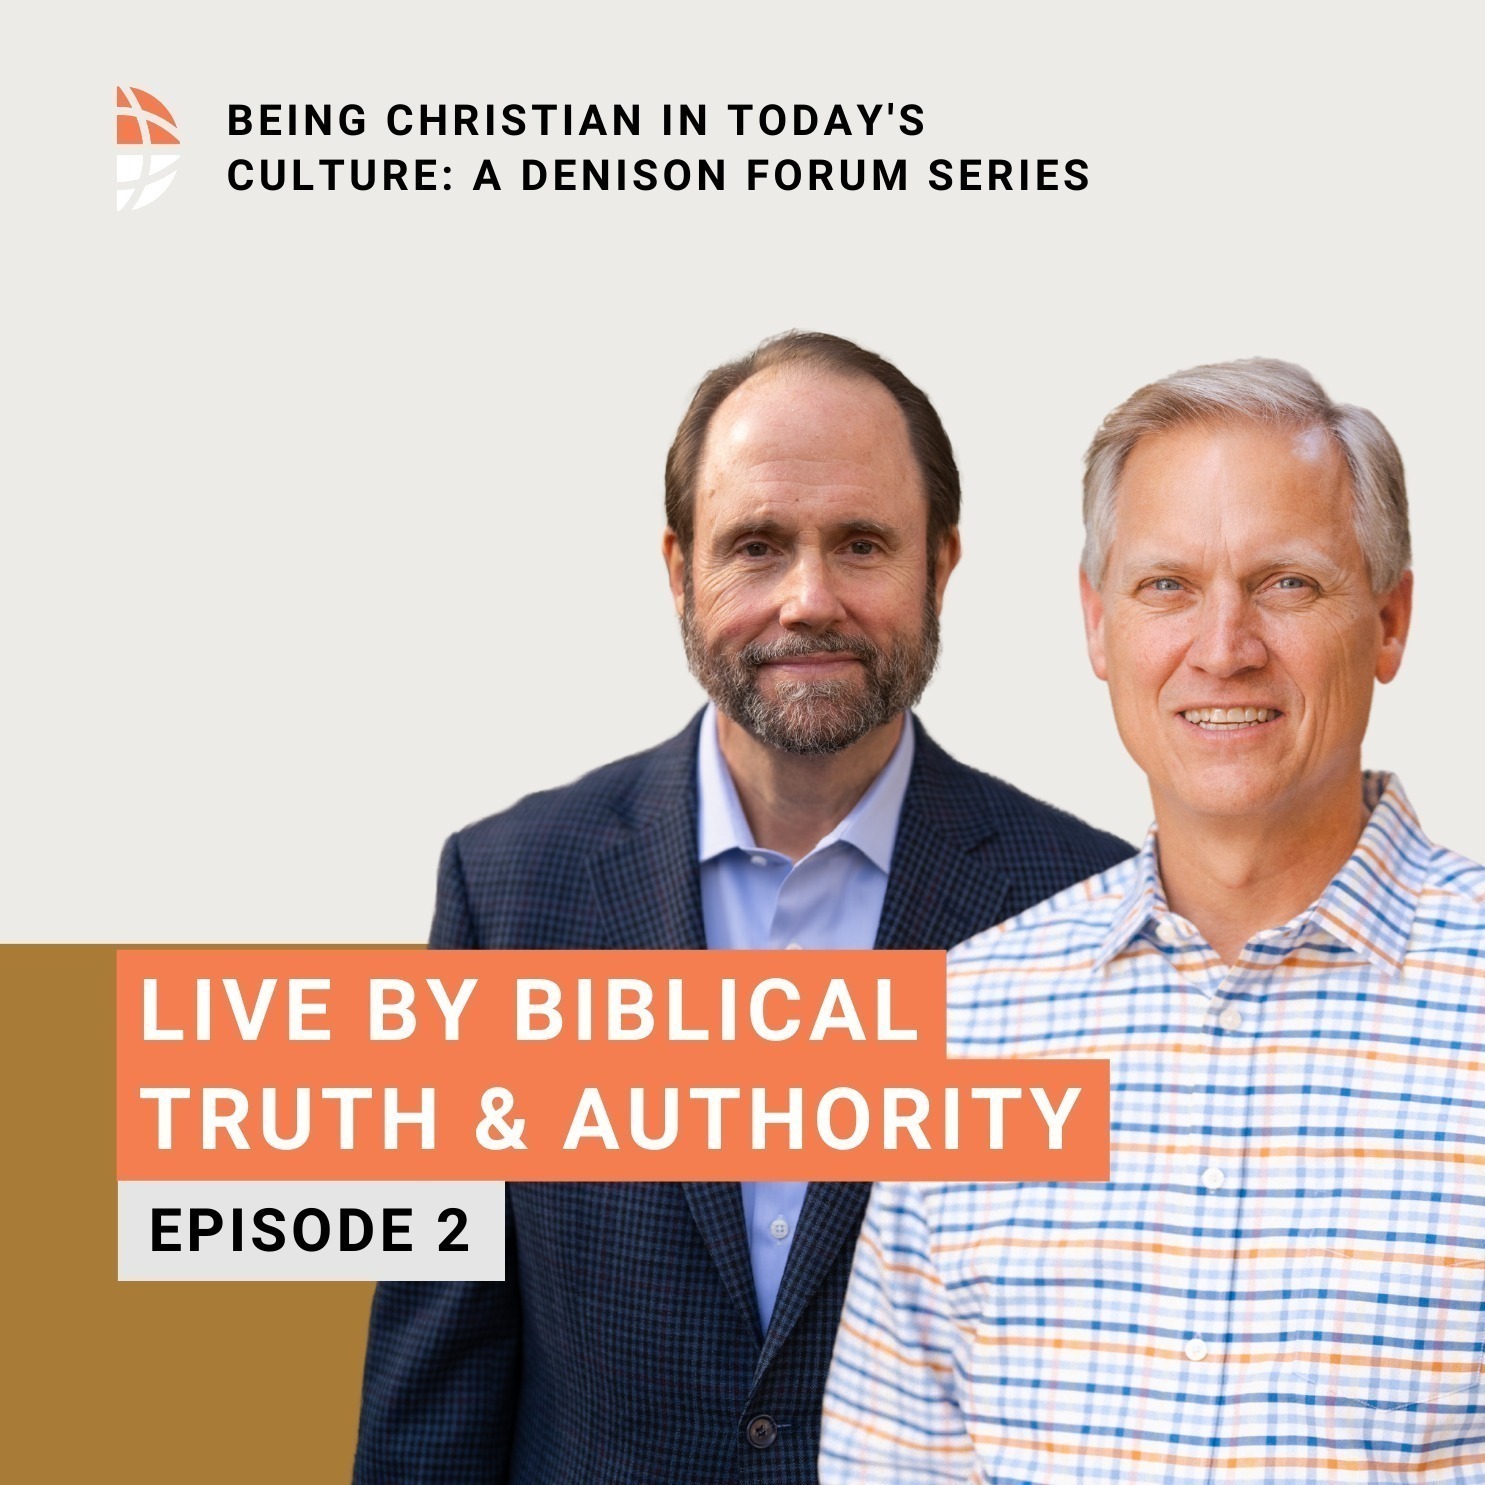 Live by biblical truth and authority - Part 2